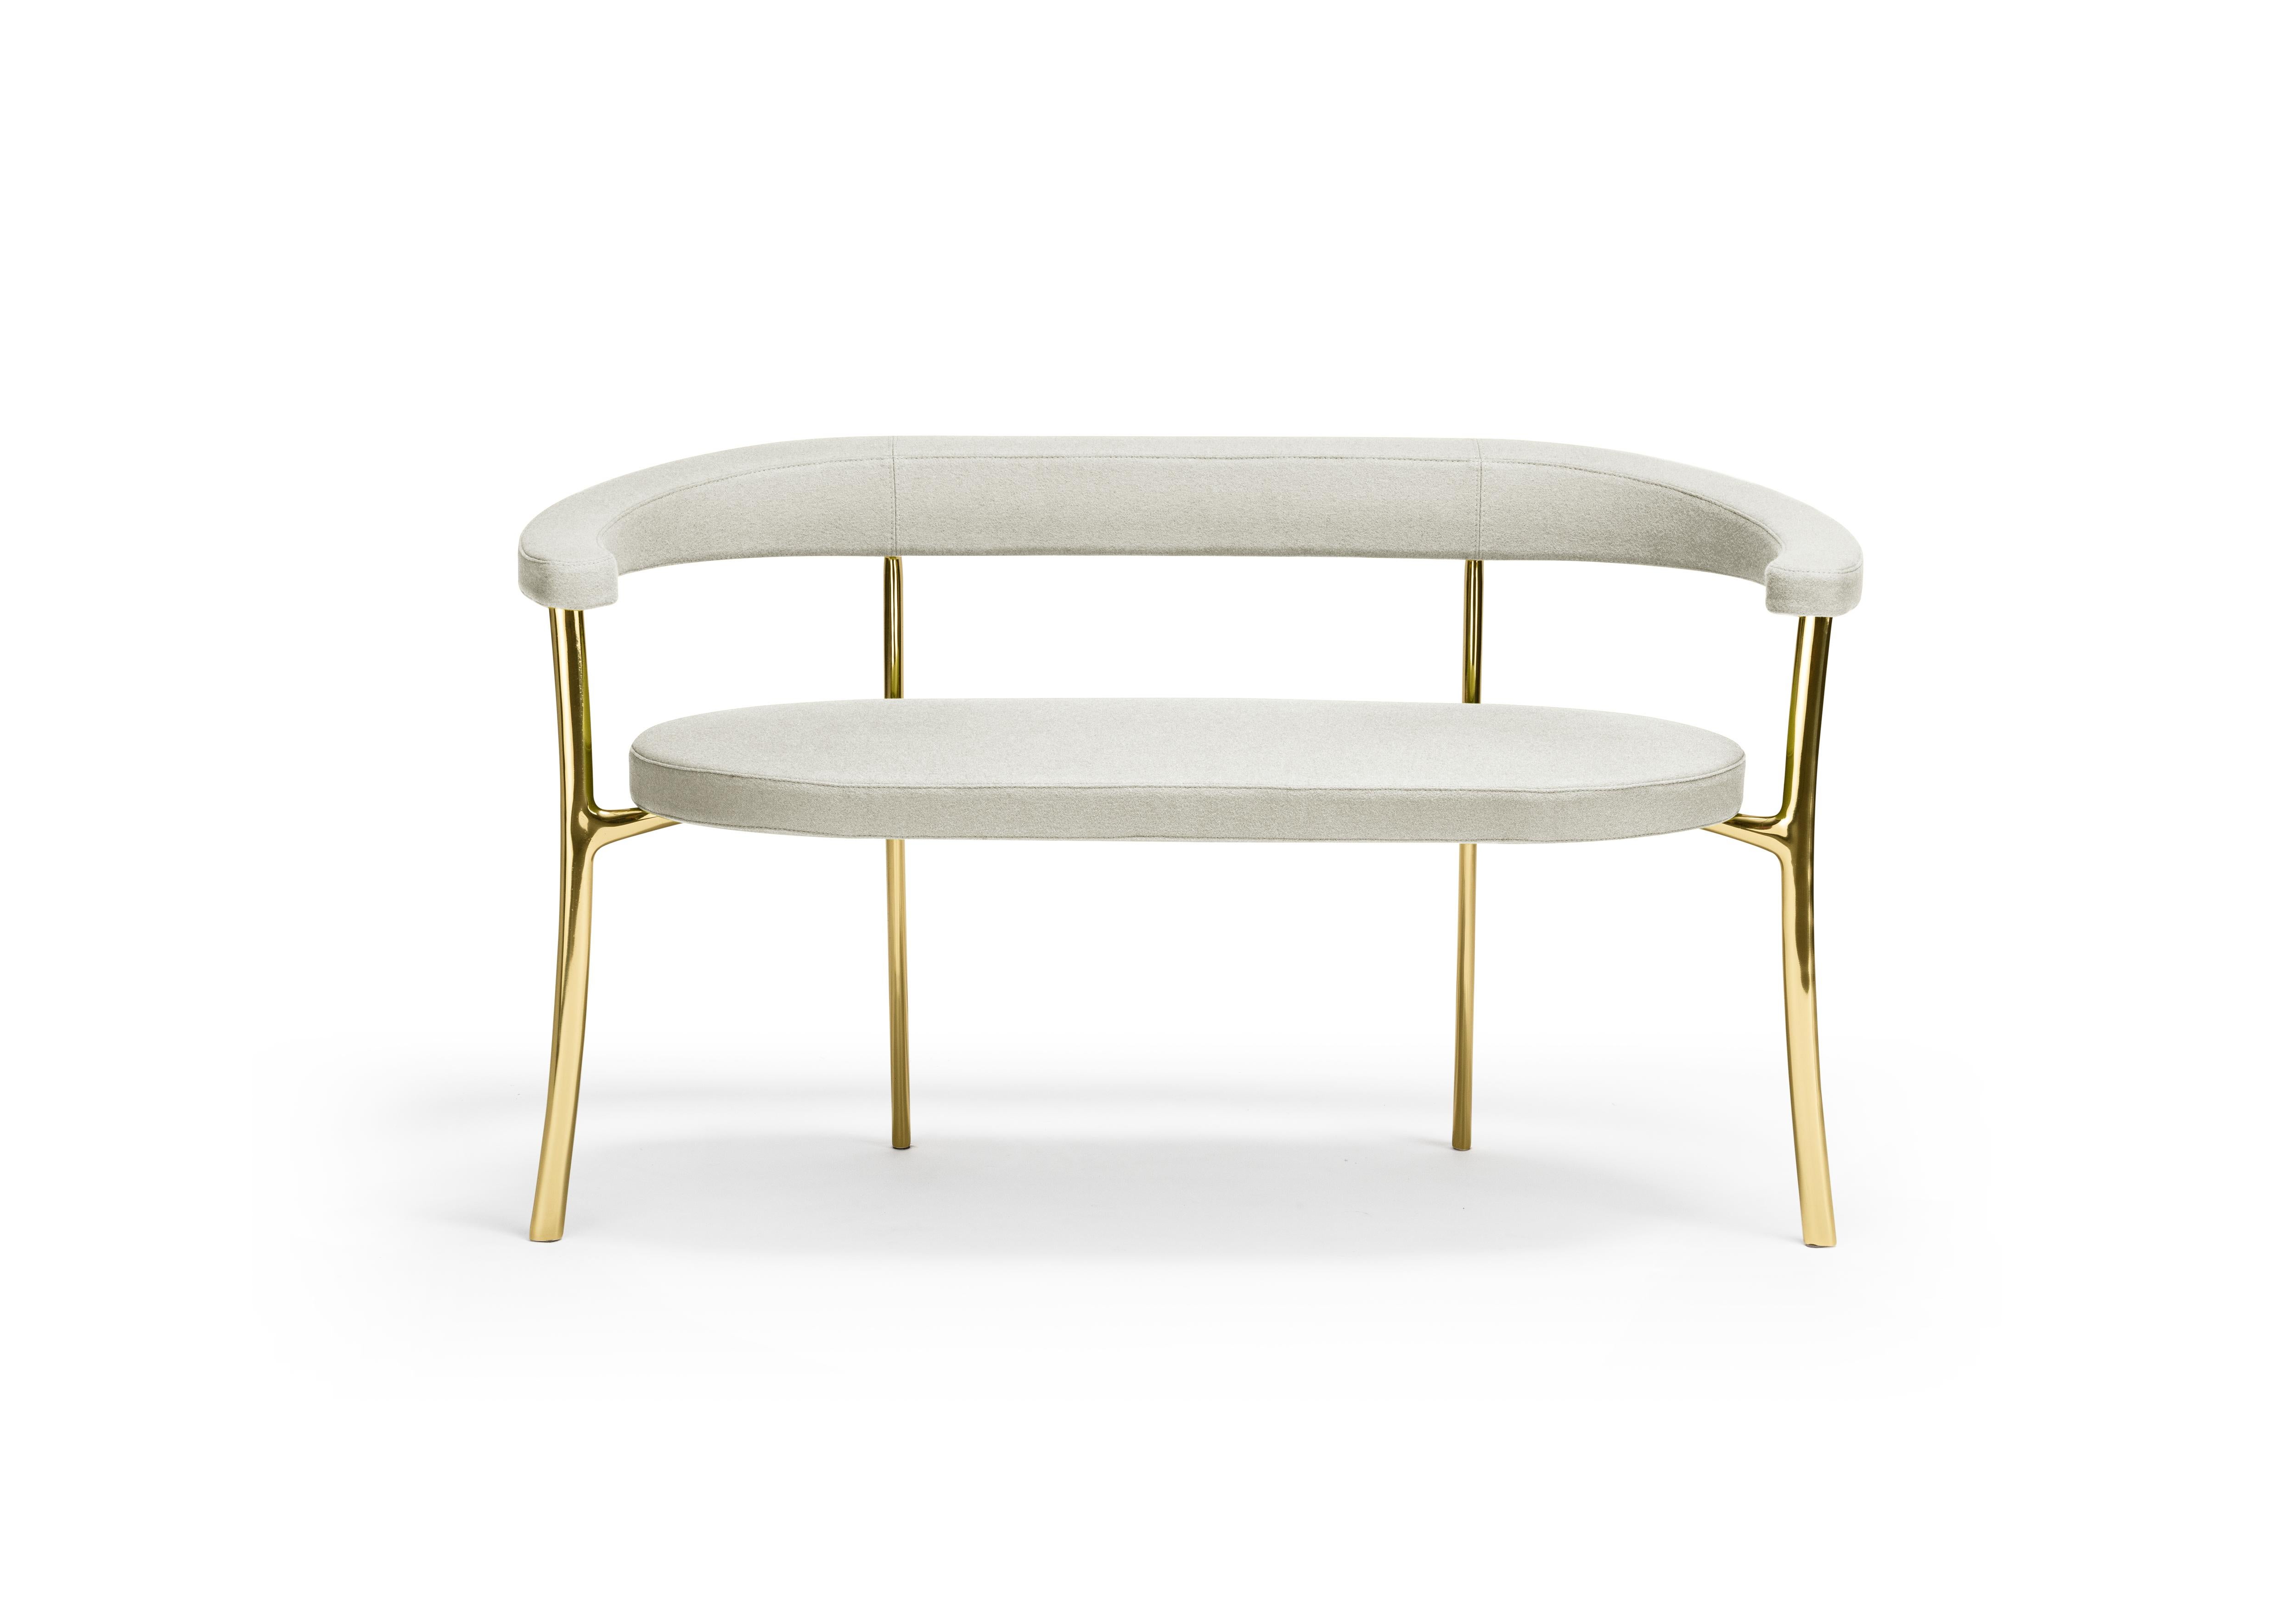 For Sale: Beige (f-1241-c0201) Ghidini1961 Katana bench in Fabric with Polished Brass Legs by Paolo Rizzatto